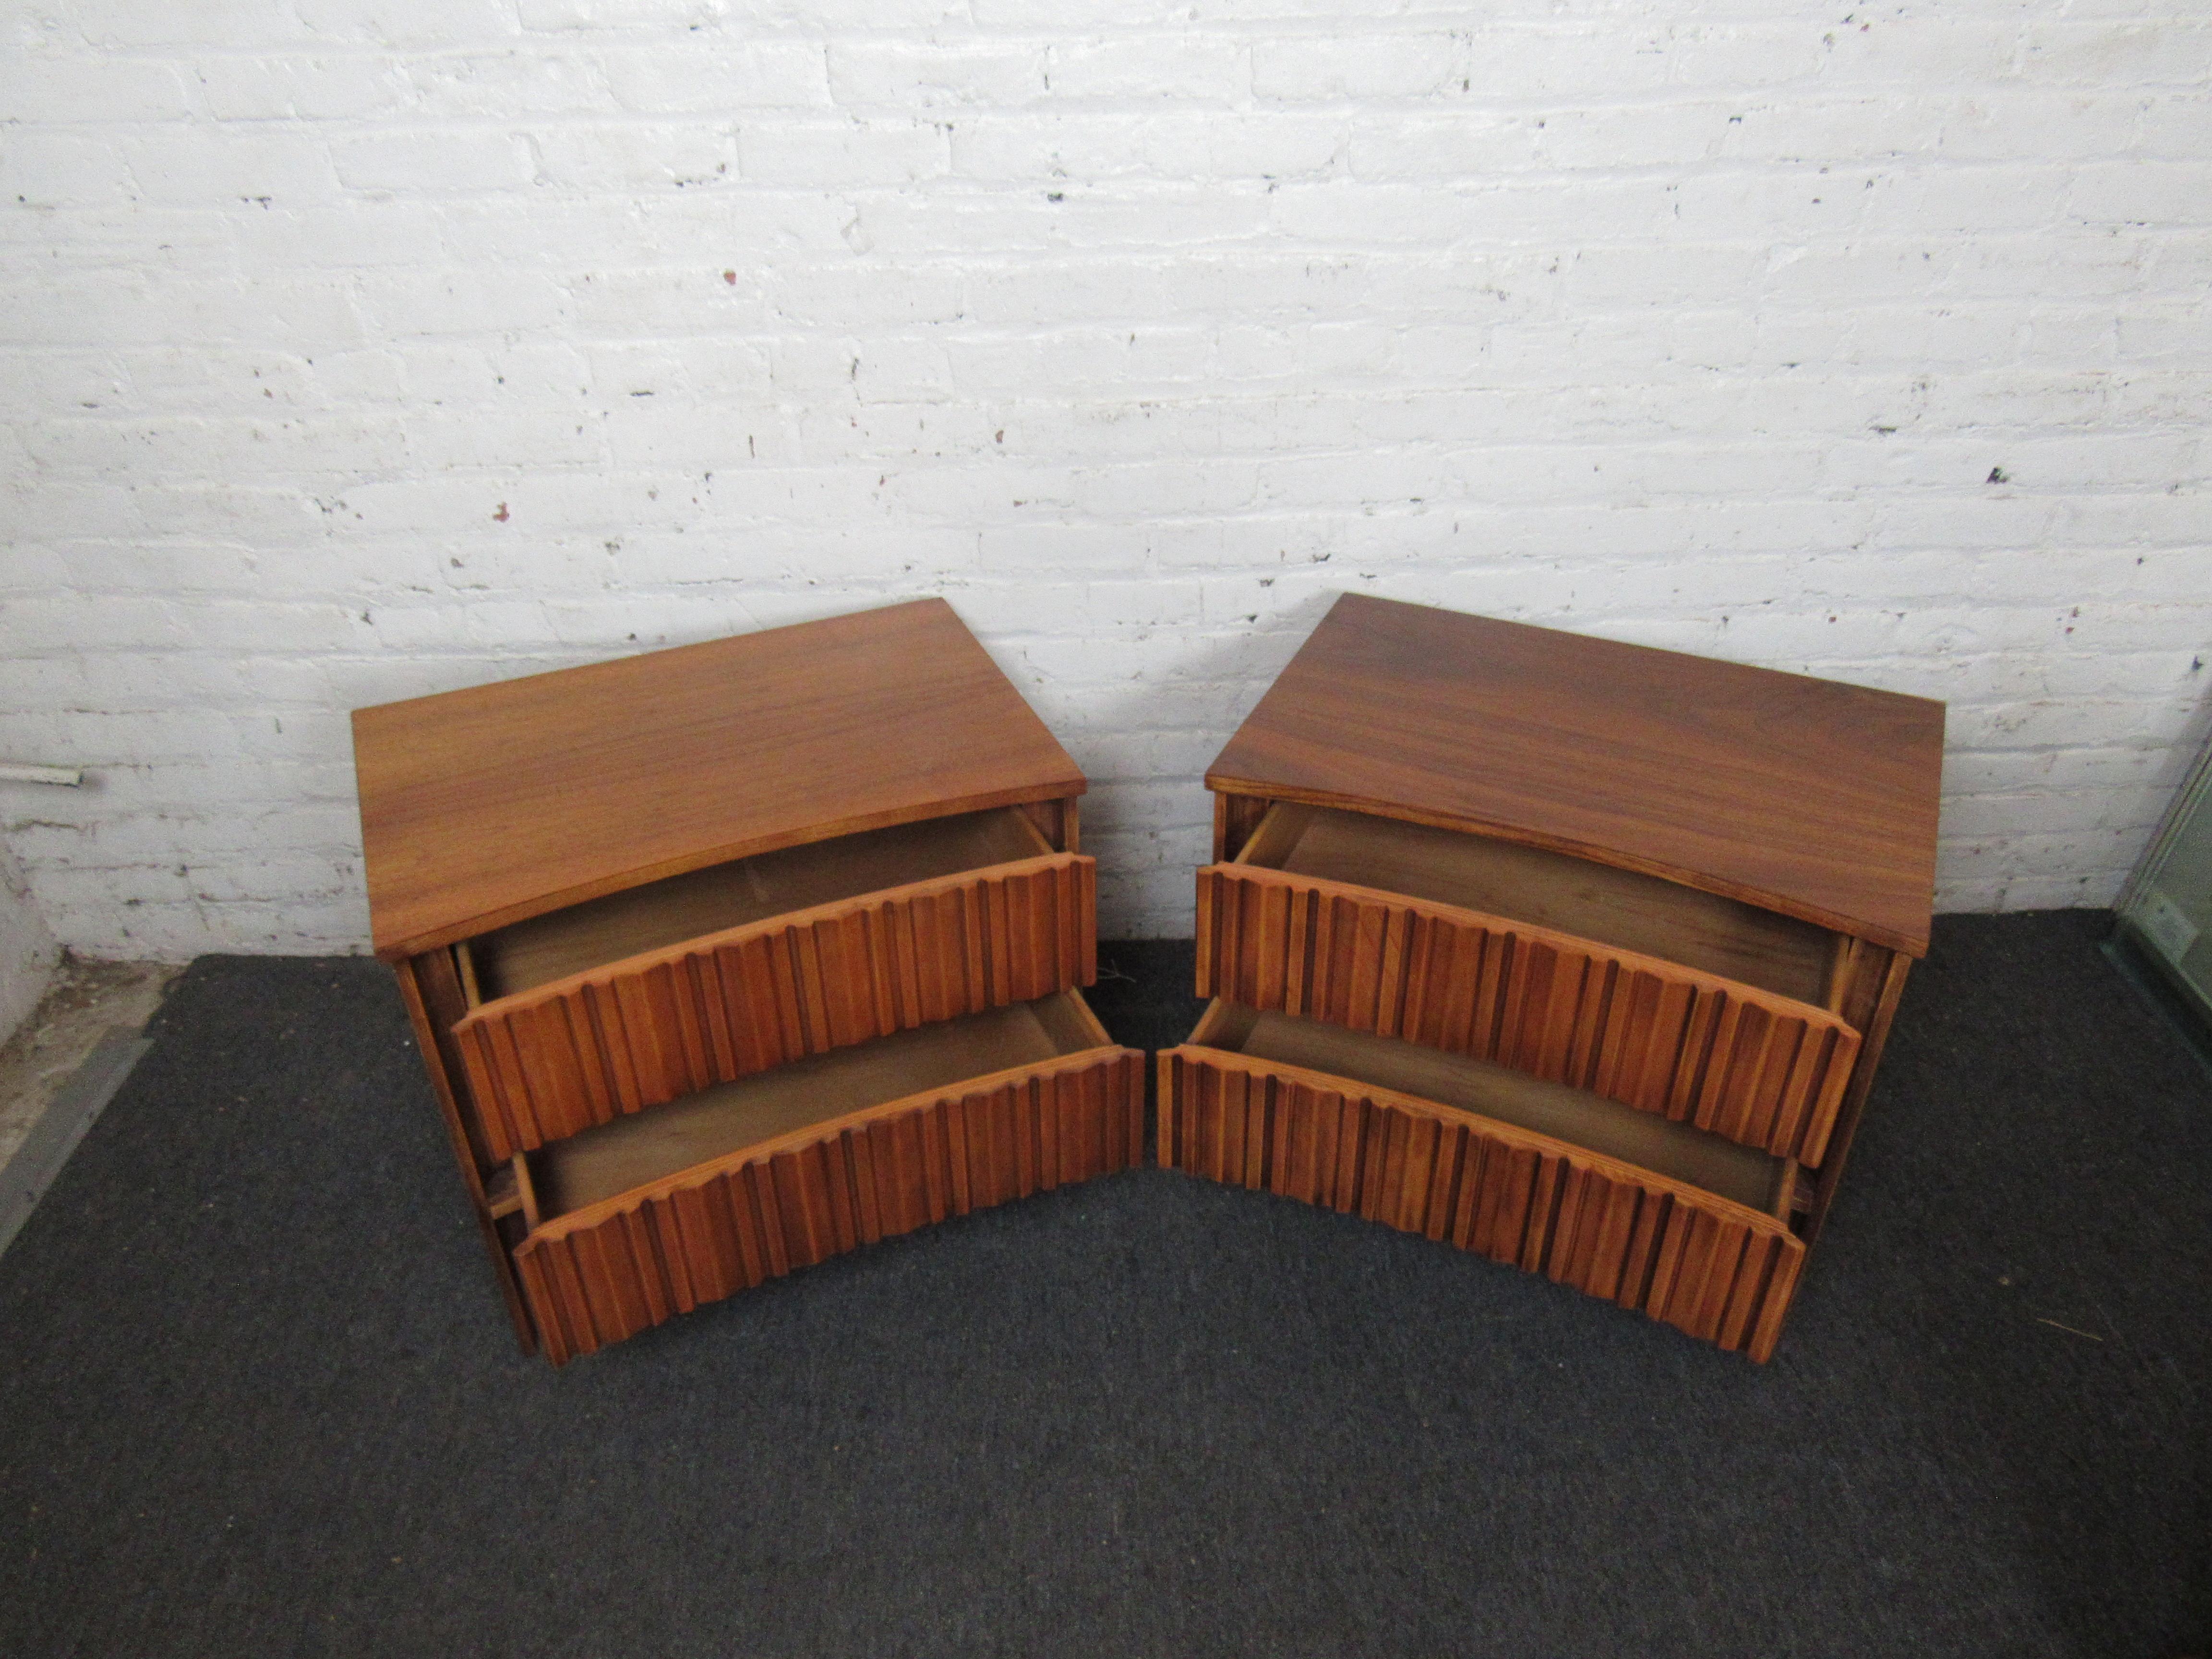 American Pair of Walnut Night Stands by Strata for Unagusta